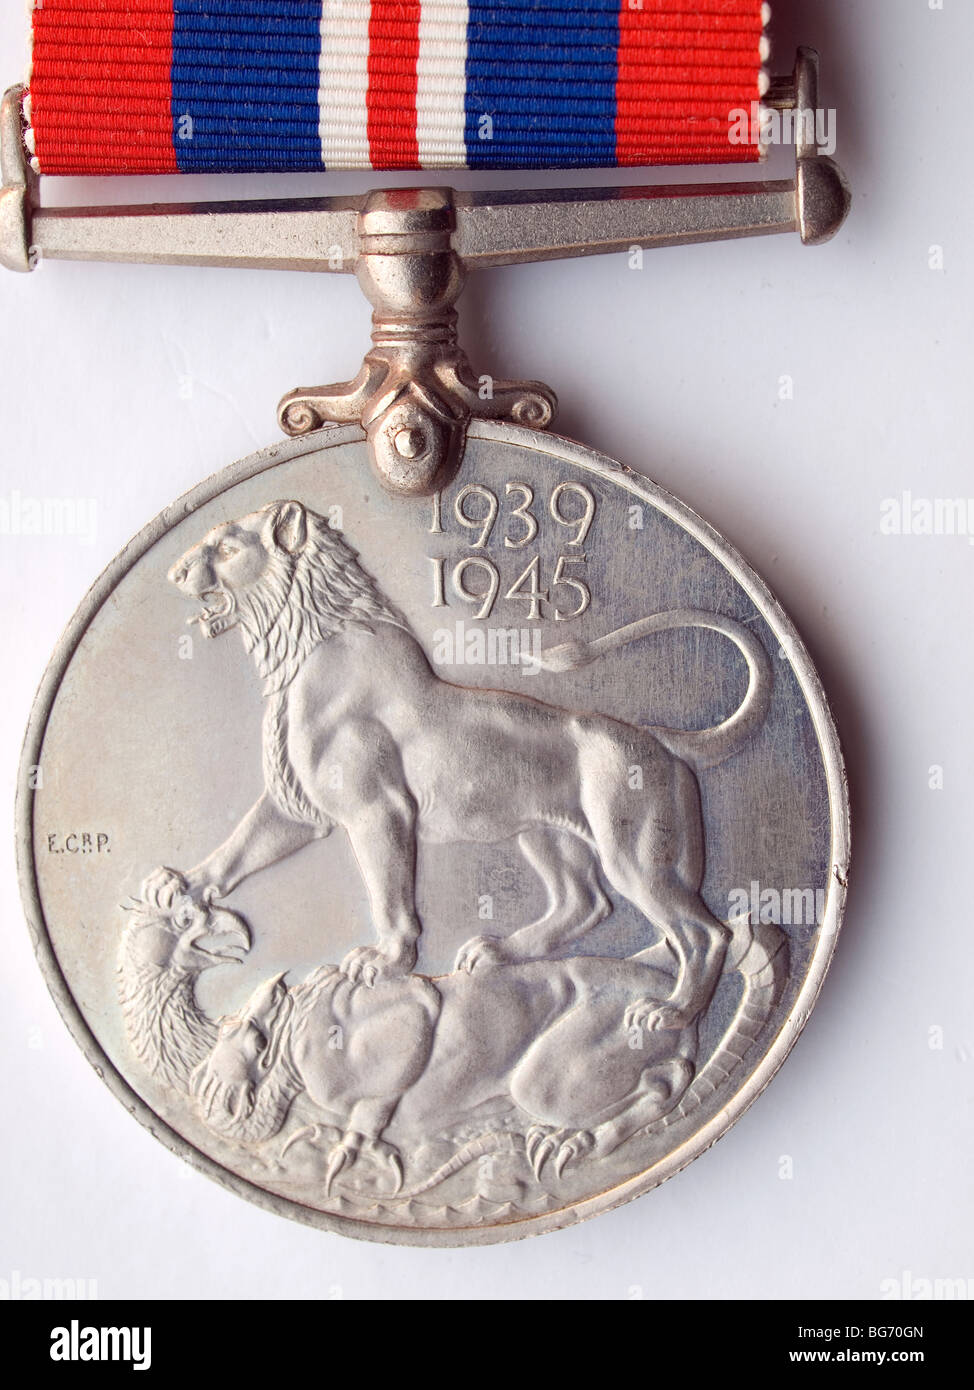 Close up of the reverse side of a World War 2 Medal awarded to British and Commonwealth Troops 1939-45 on a white background  Stock Photo